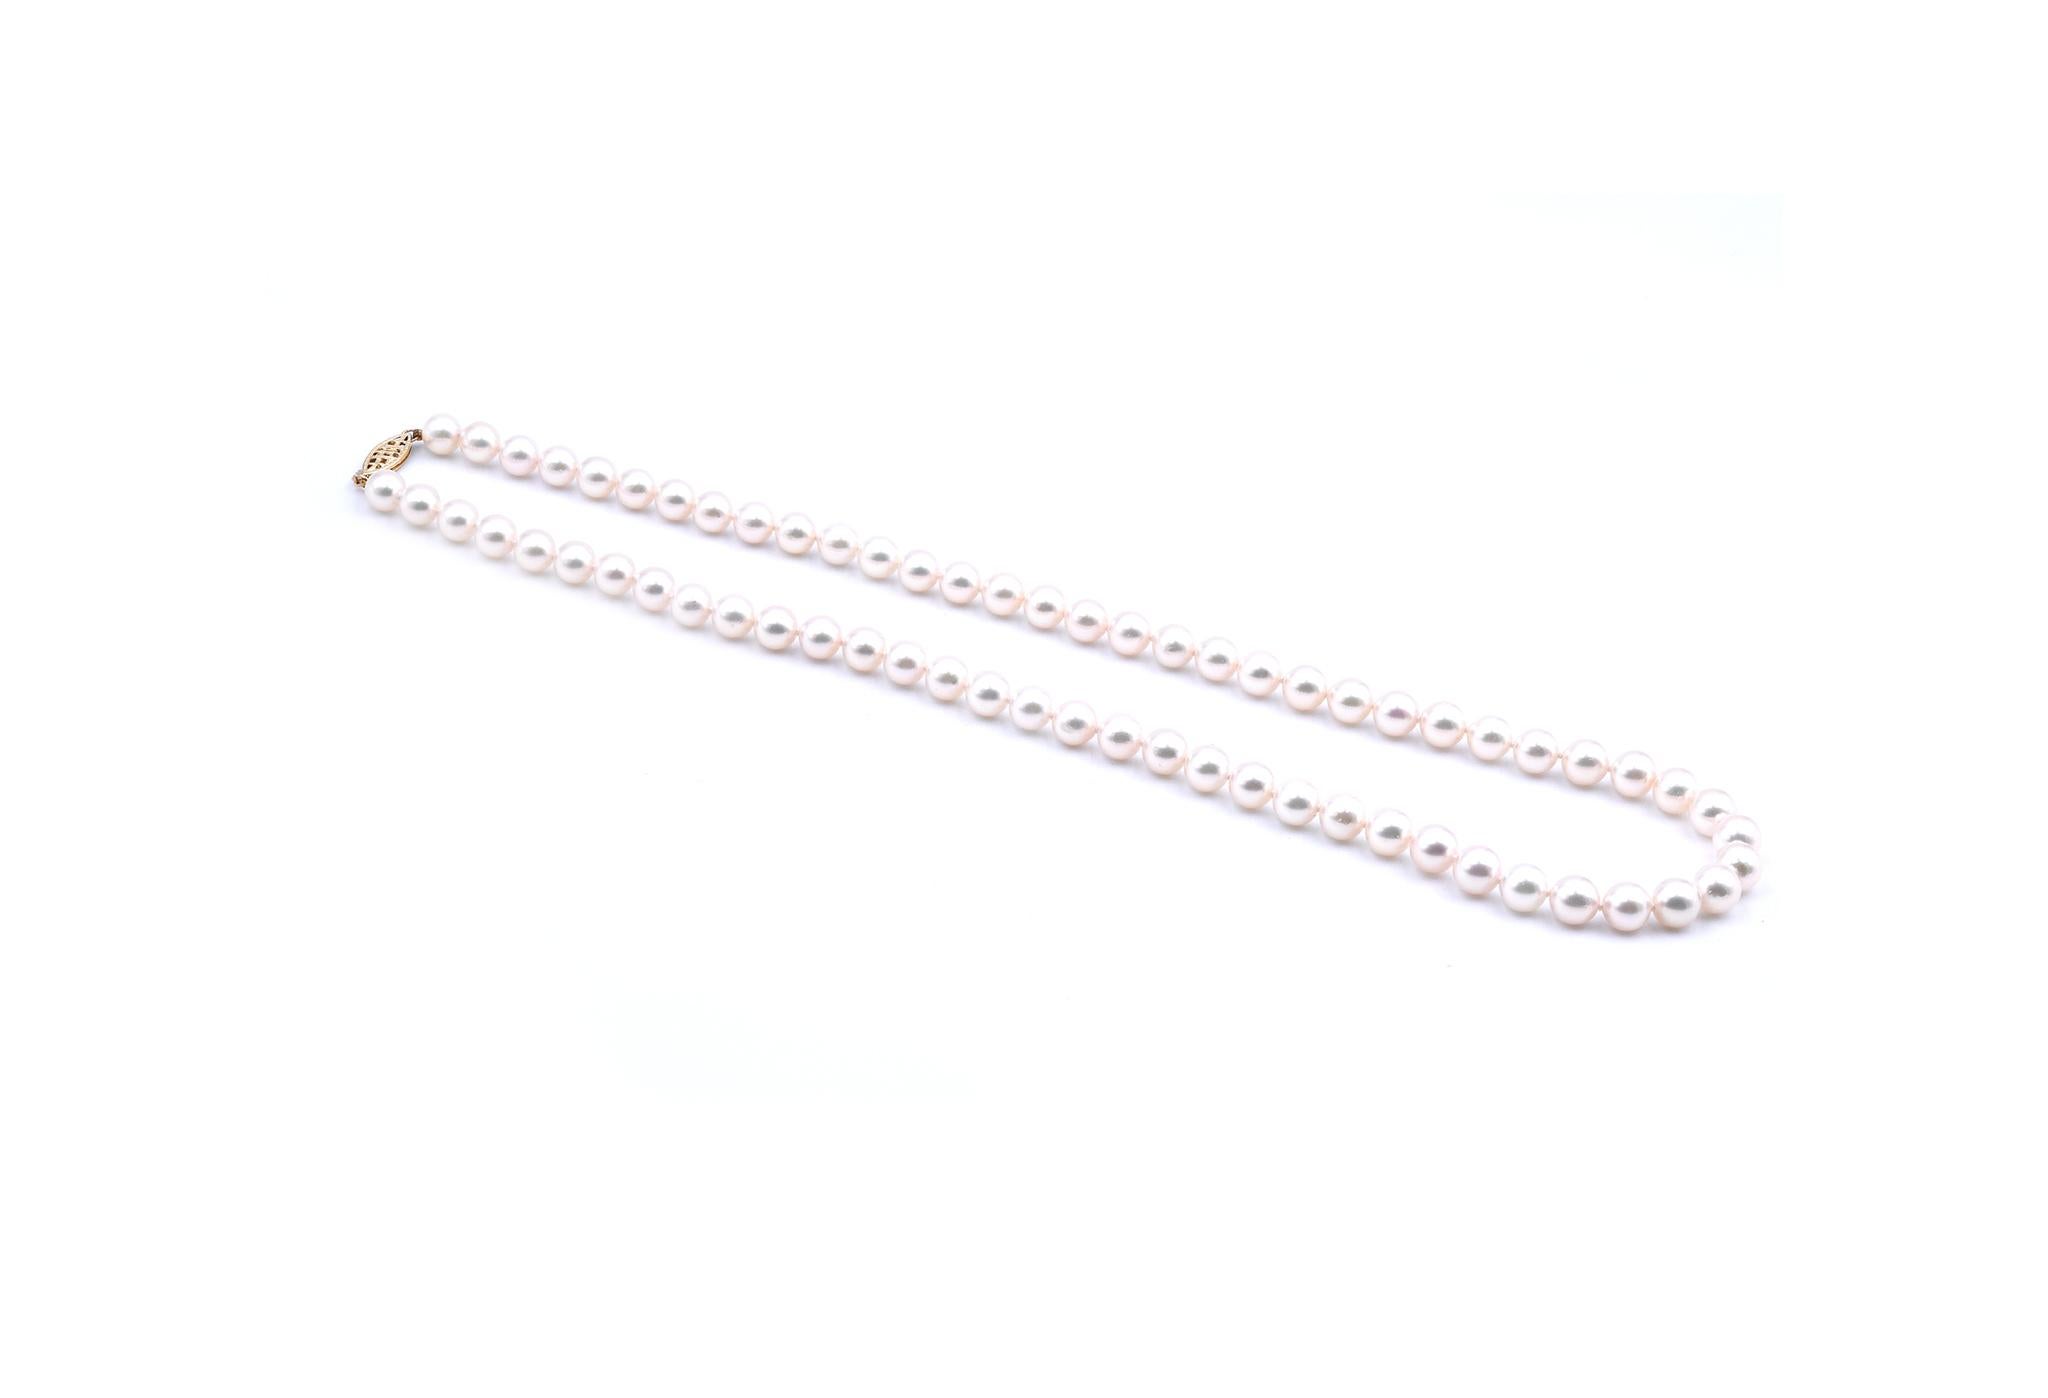 Designer: Custom
Material: 14K yellow gold clasp
Pearl: 6.5-7mm Akoya Pearls
Dimensions: necklace measures 16-inches in length
Weight: 28.52 grams
